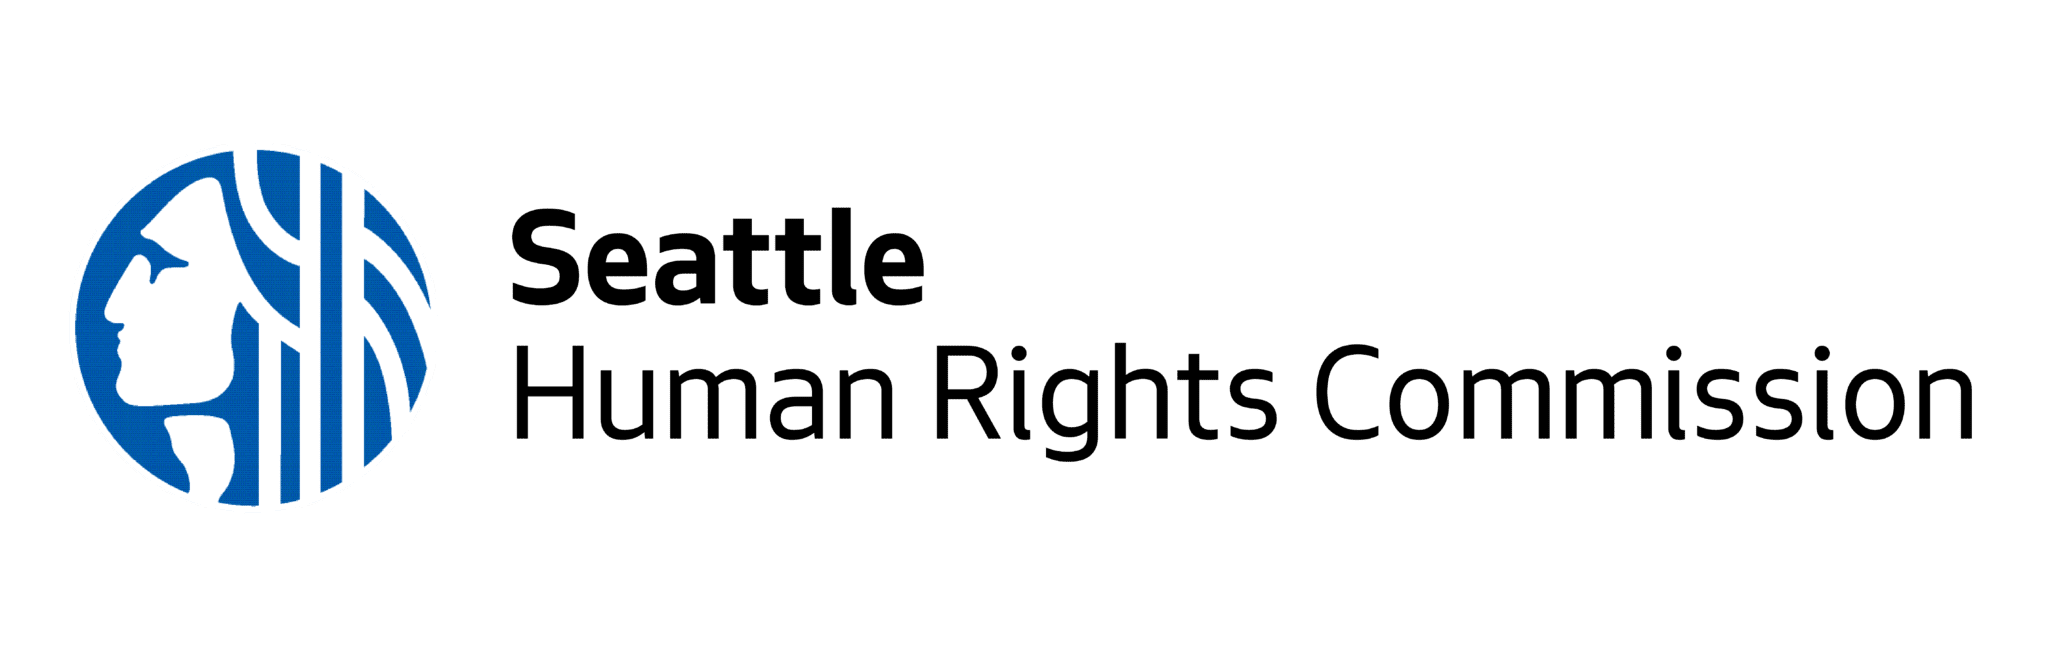 Logo for the Seattle Human Rights Commission.